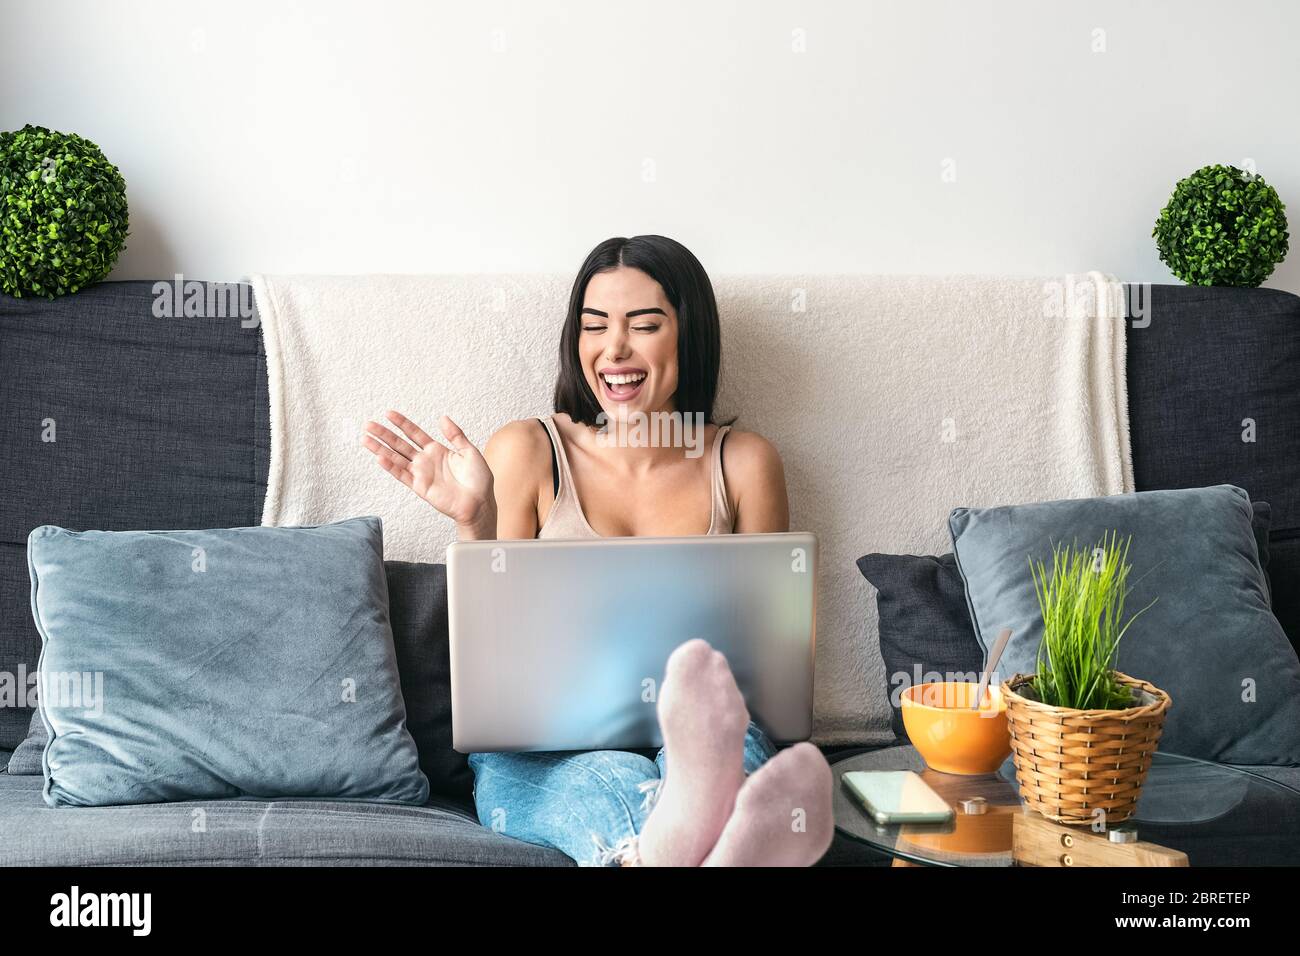 Young woman making video call sitting on sofa - Happy girl having fun doing video conference with family and friends Stock Photo